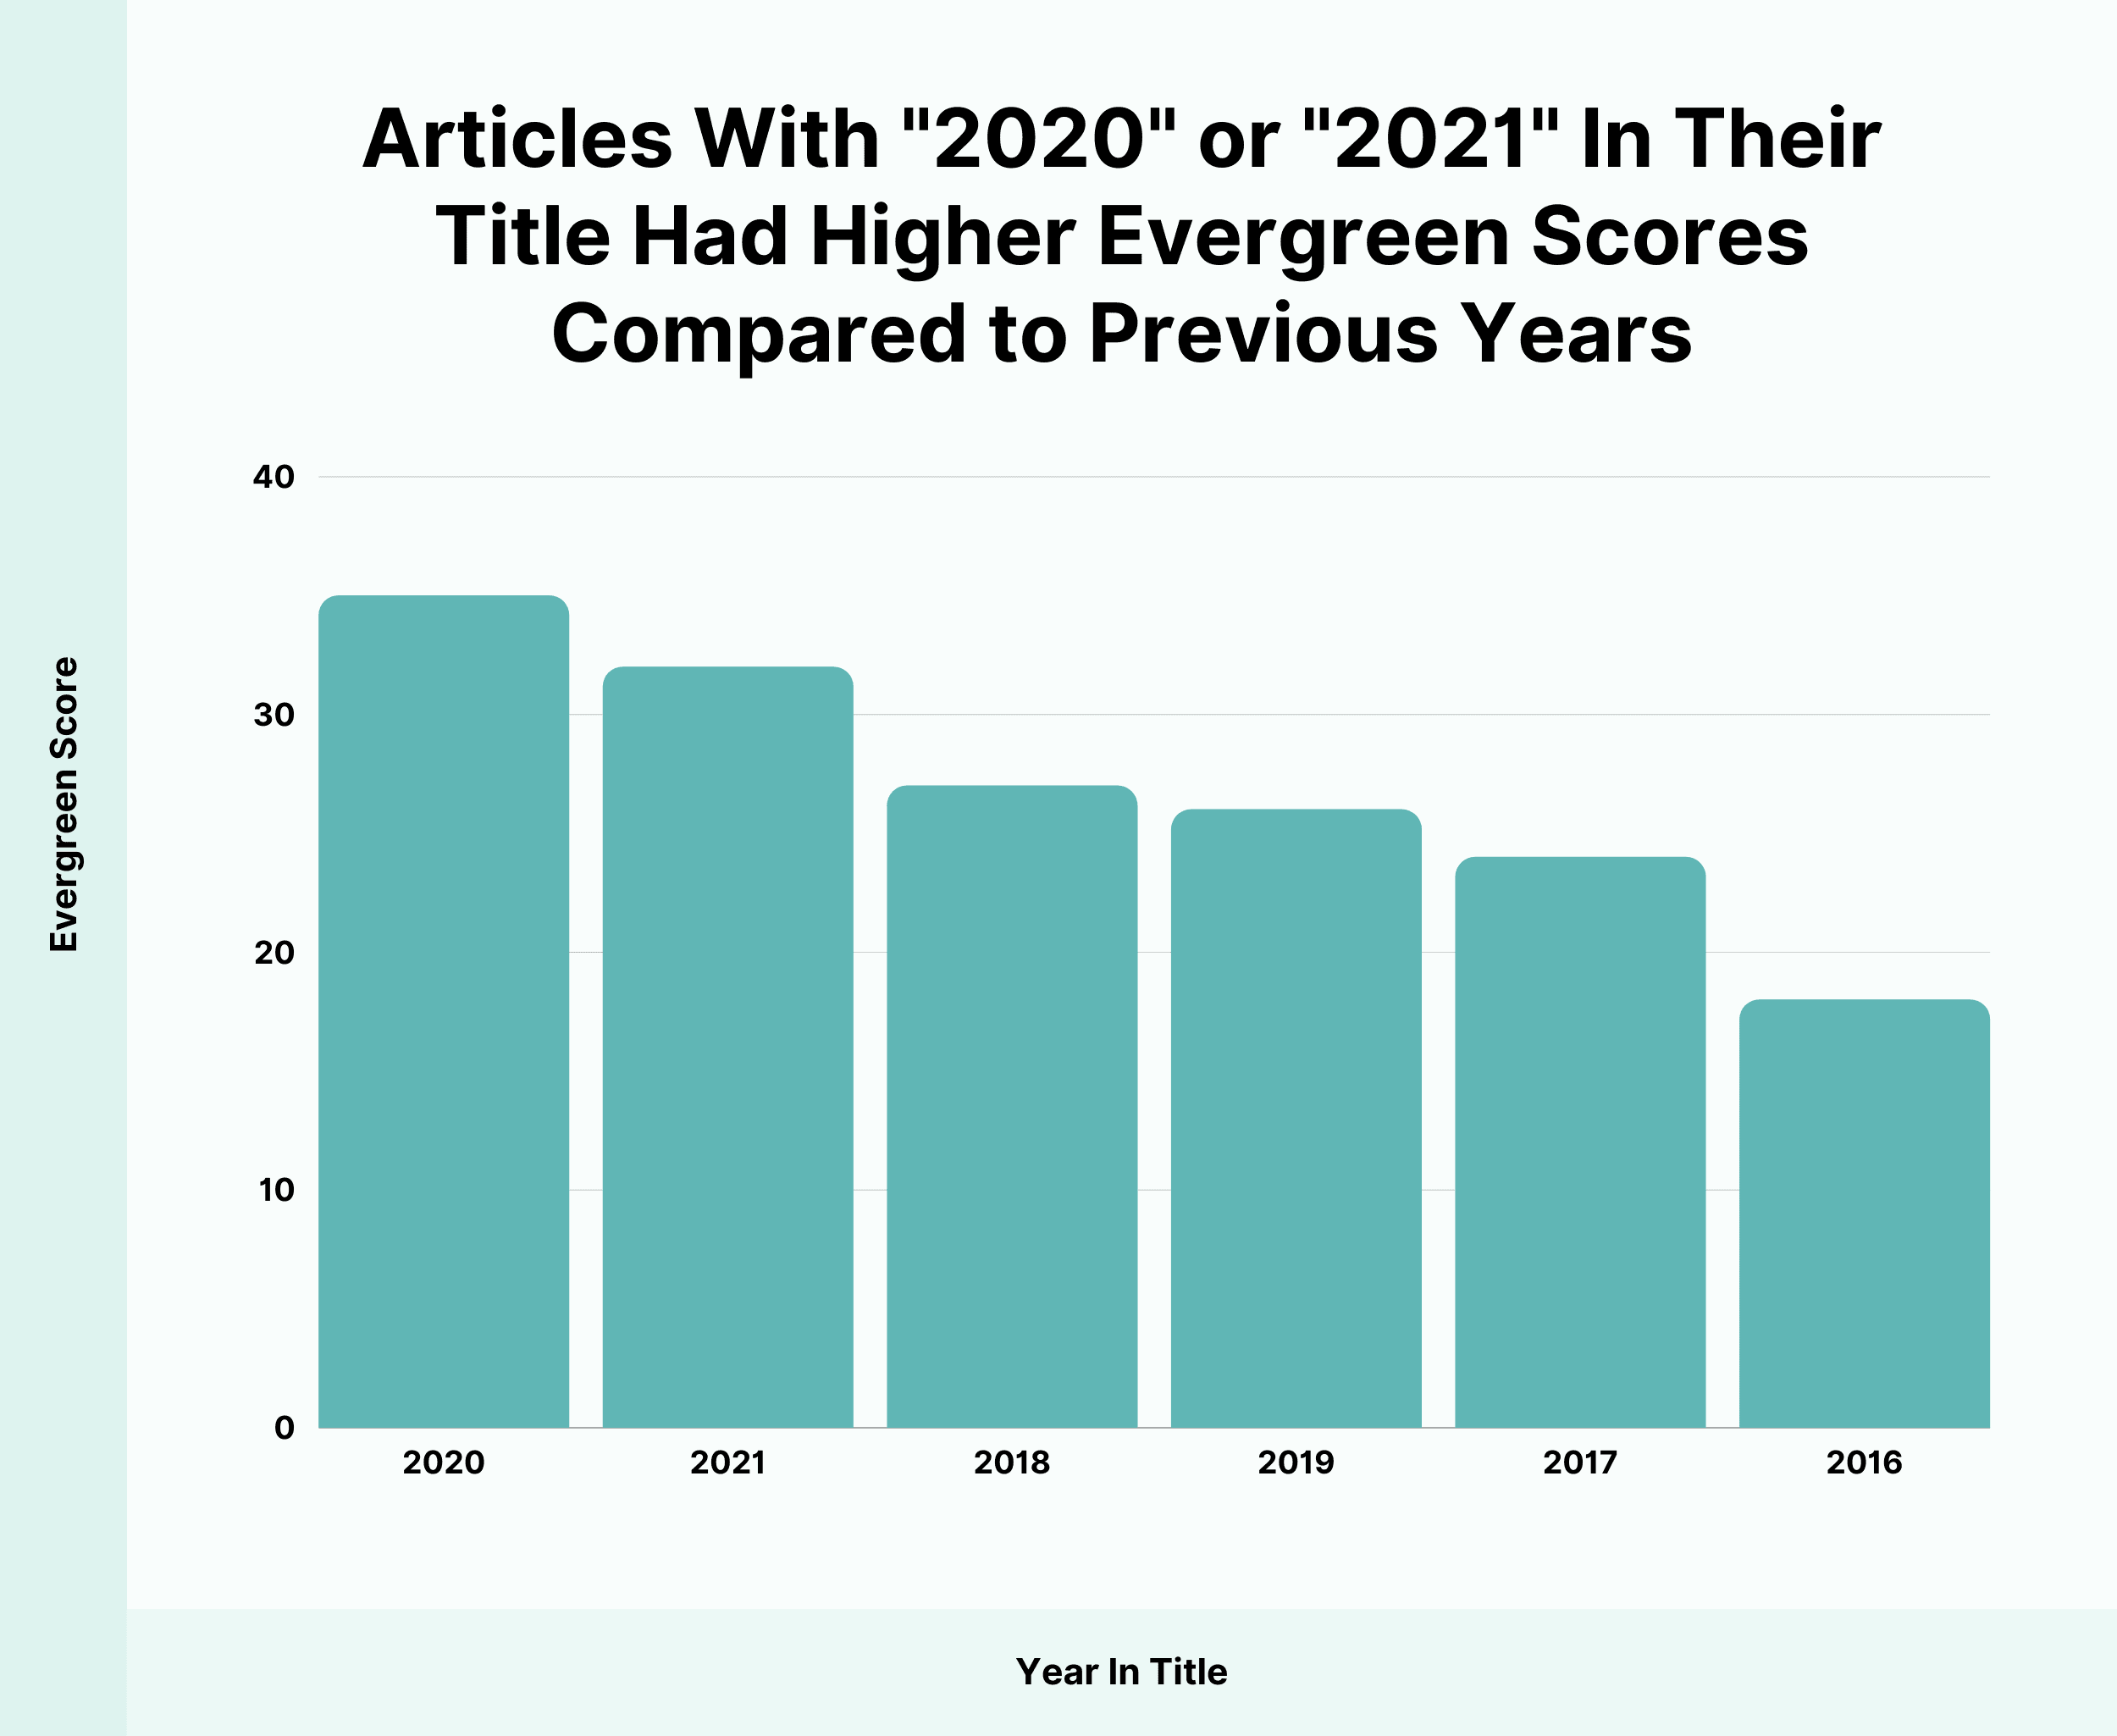 Articles with "2020" or "2021" in their title had higher evergreen scores compared to previous years